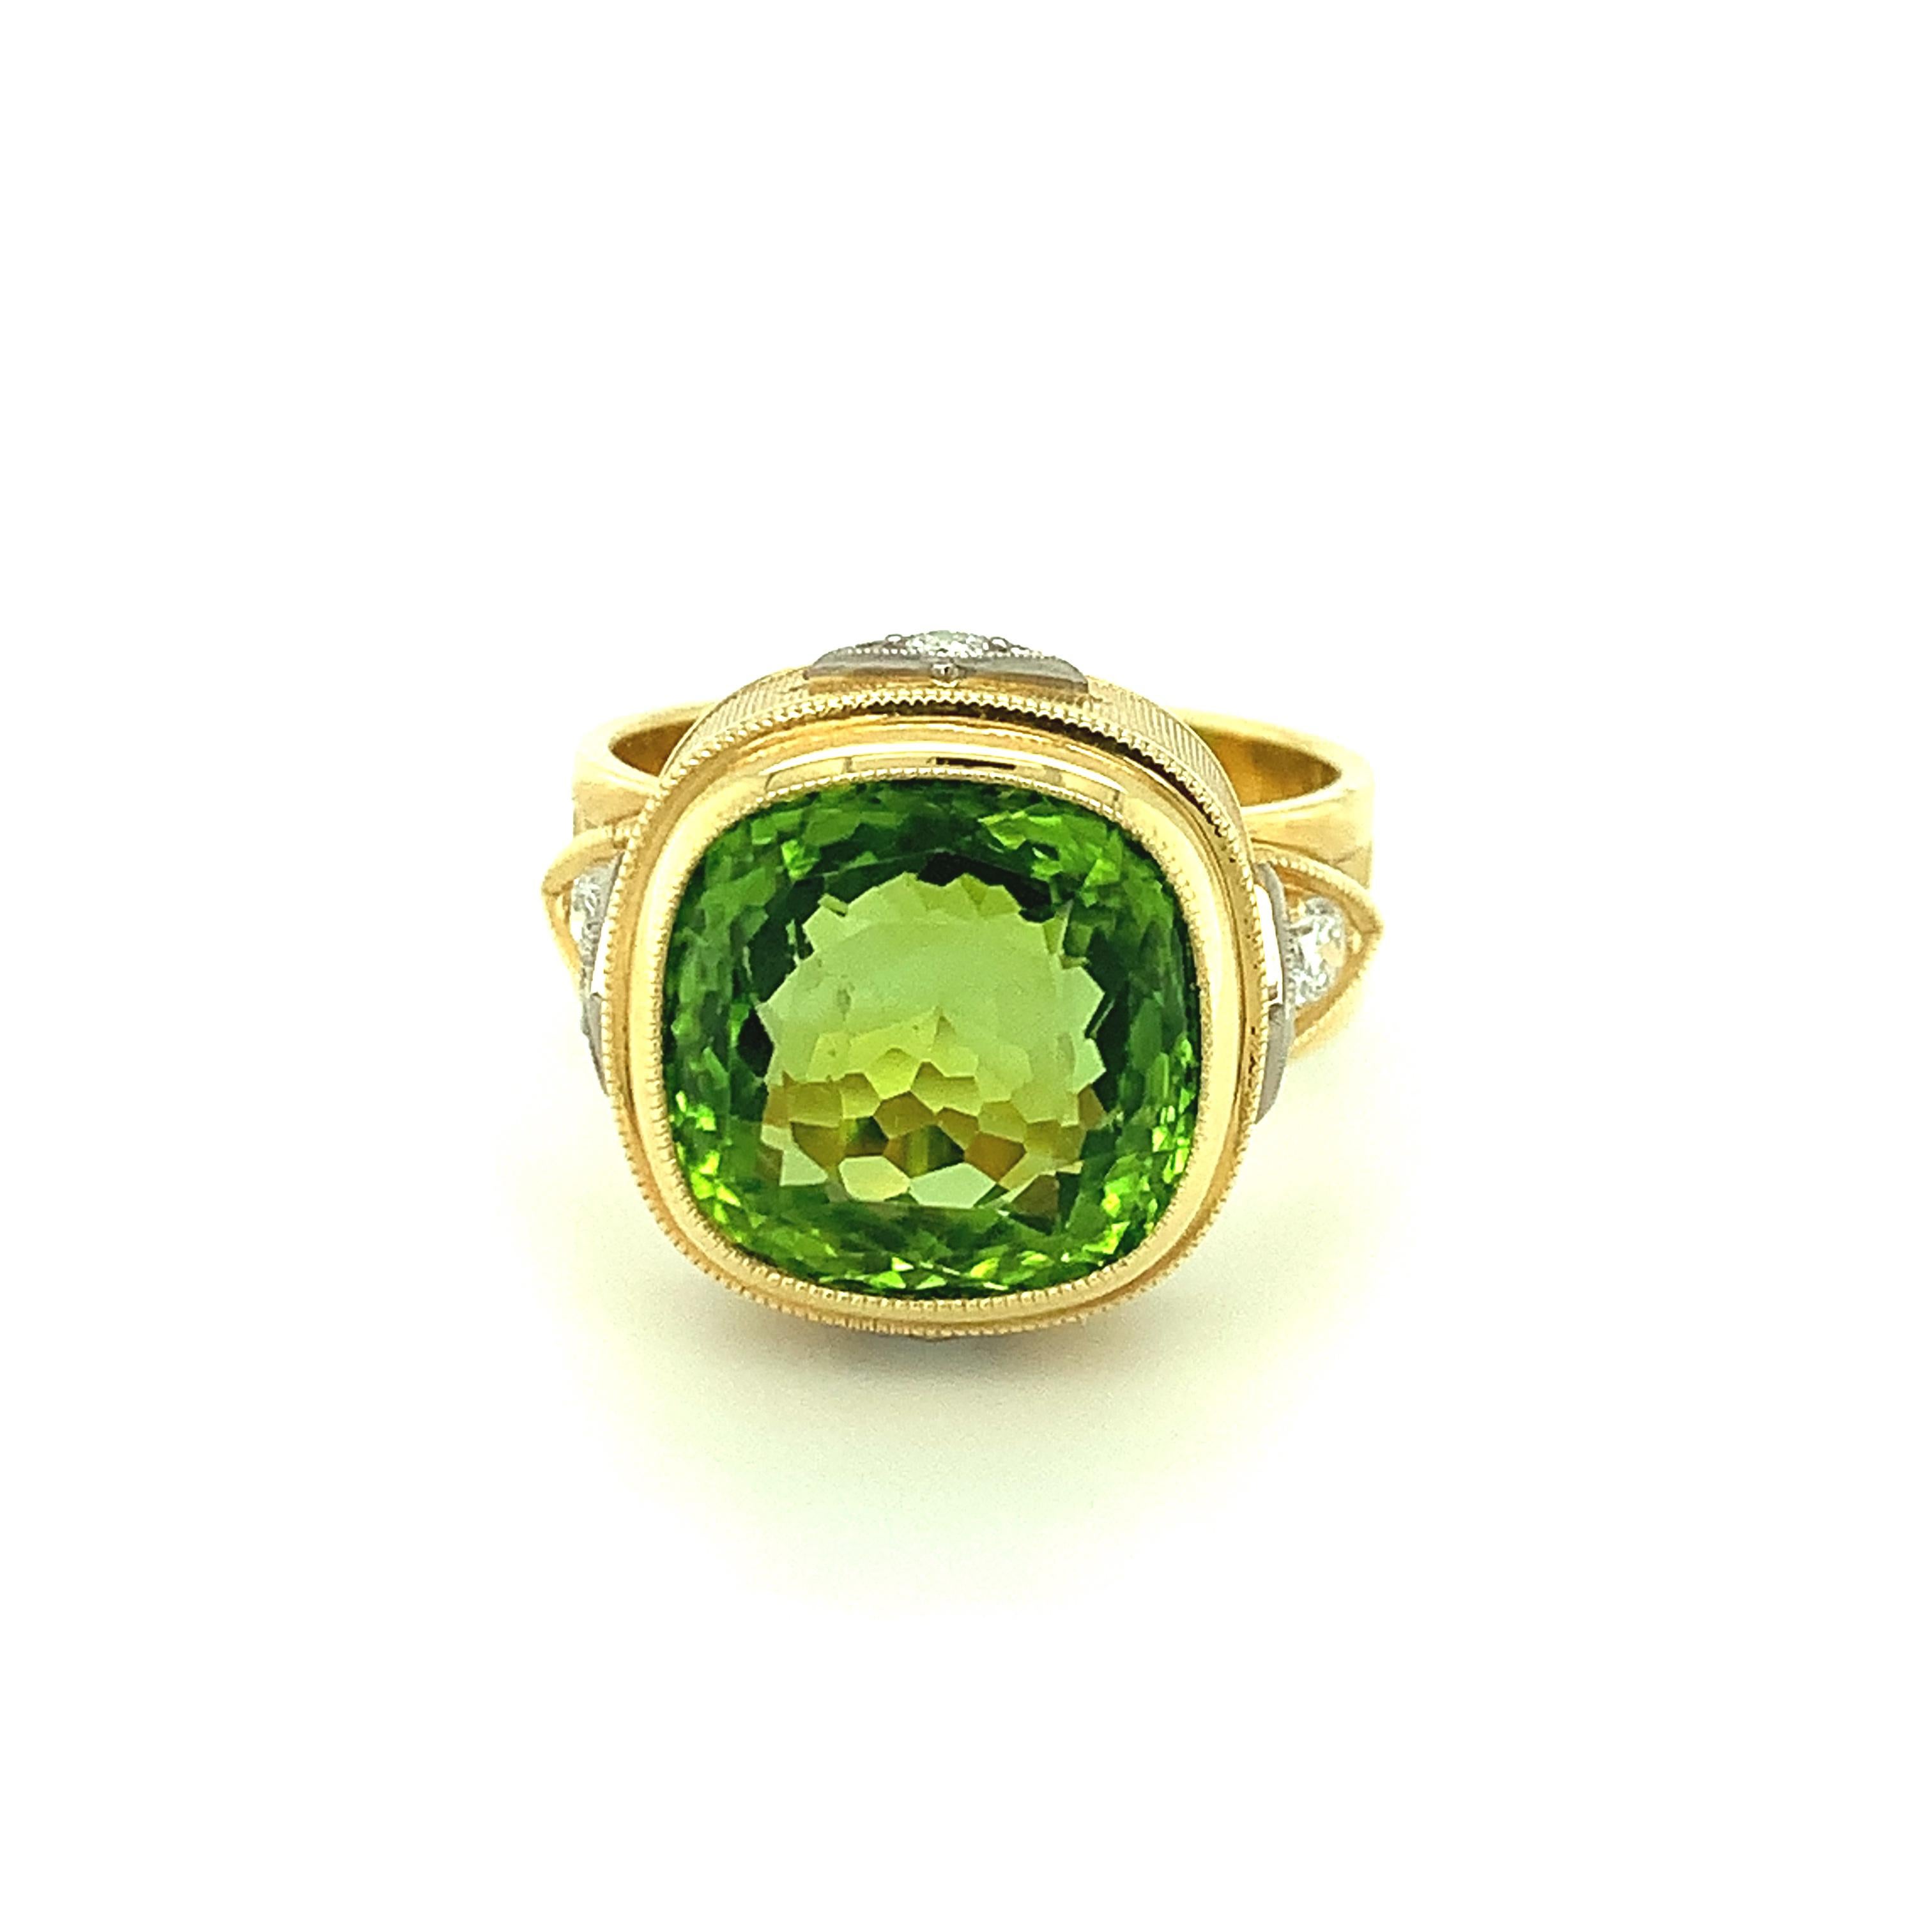 This handsome 18k gold ring features a beautifully crystalline, 8.15 carat cushion-cut peridot with gorgeous, bright green color. Four sparkling, brilliant cut white diamonds set in 18k white gold adorn the finely engraved bezel, with an additional